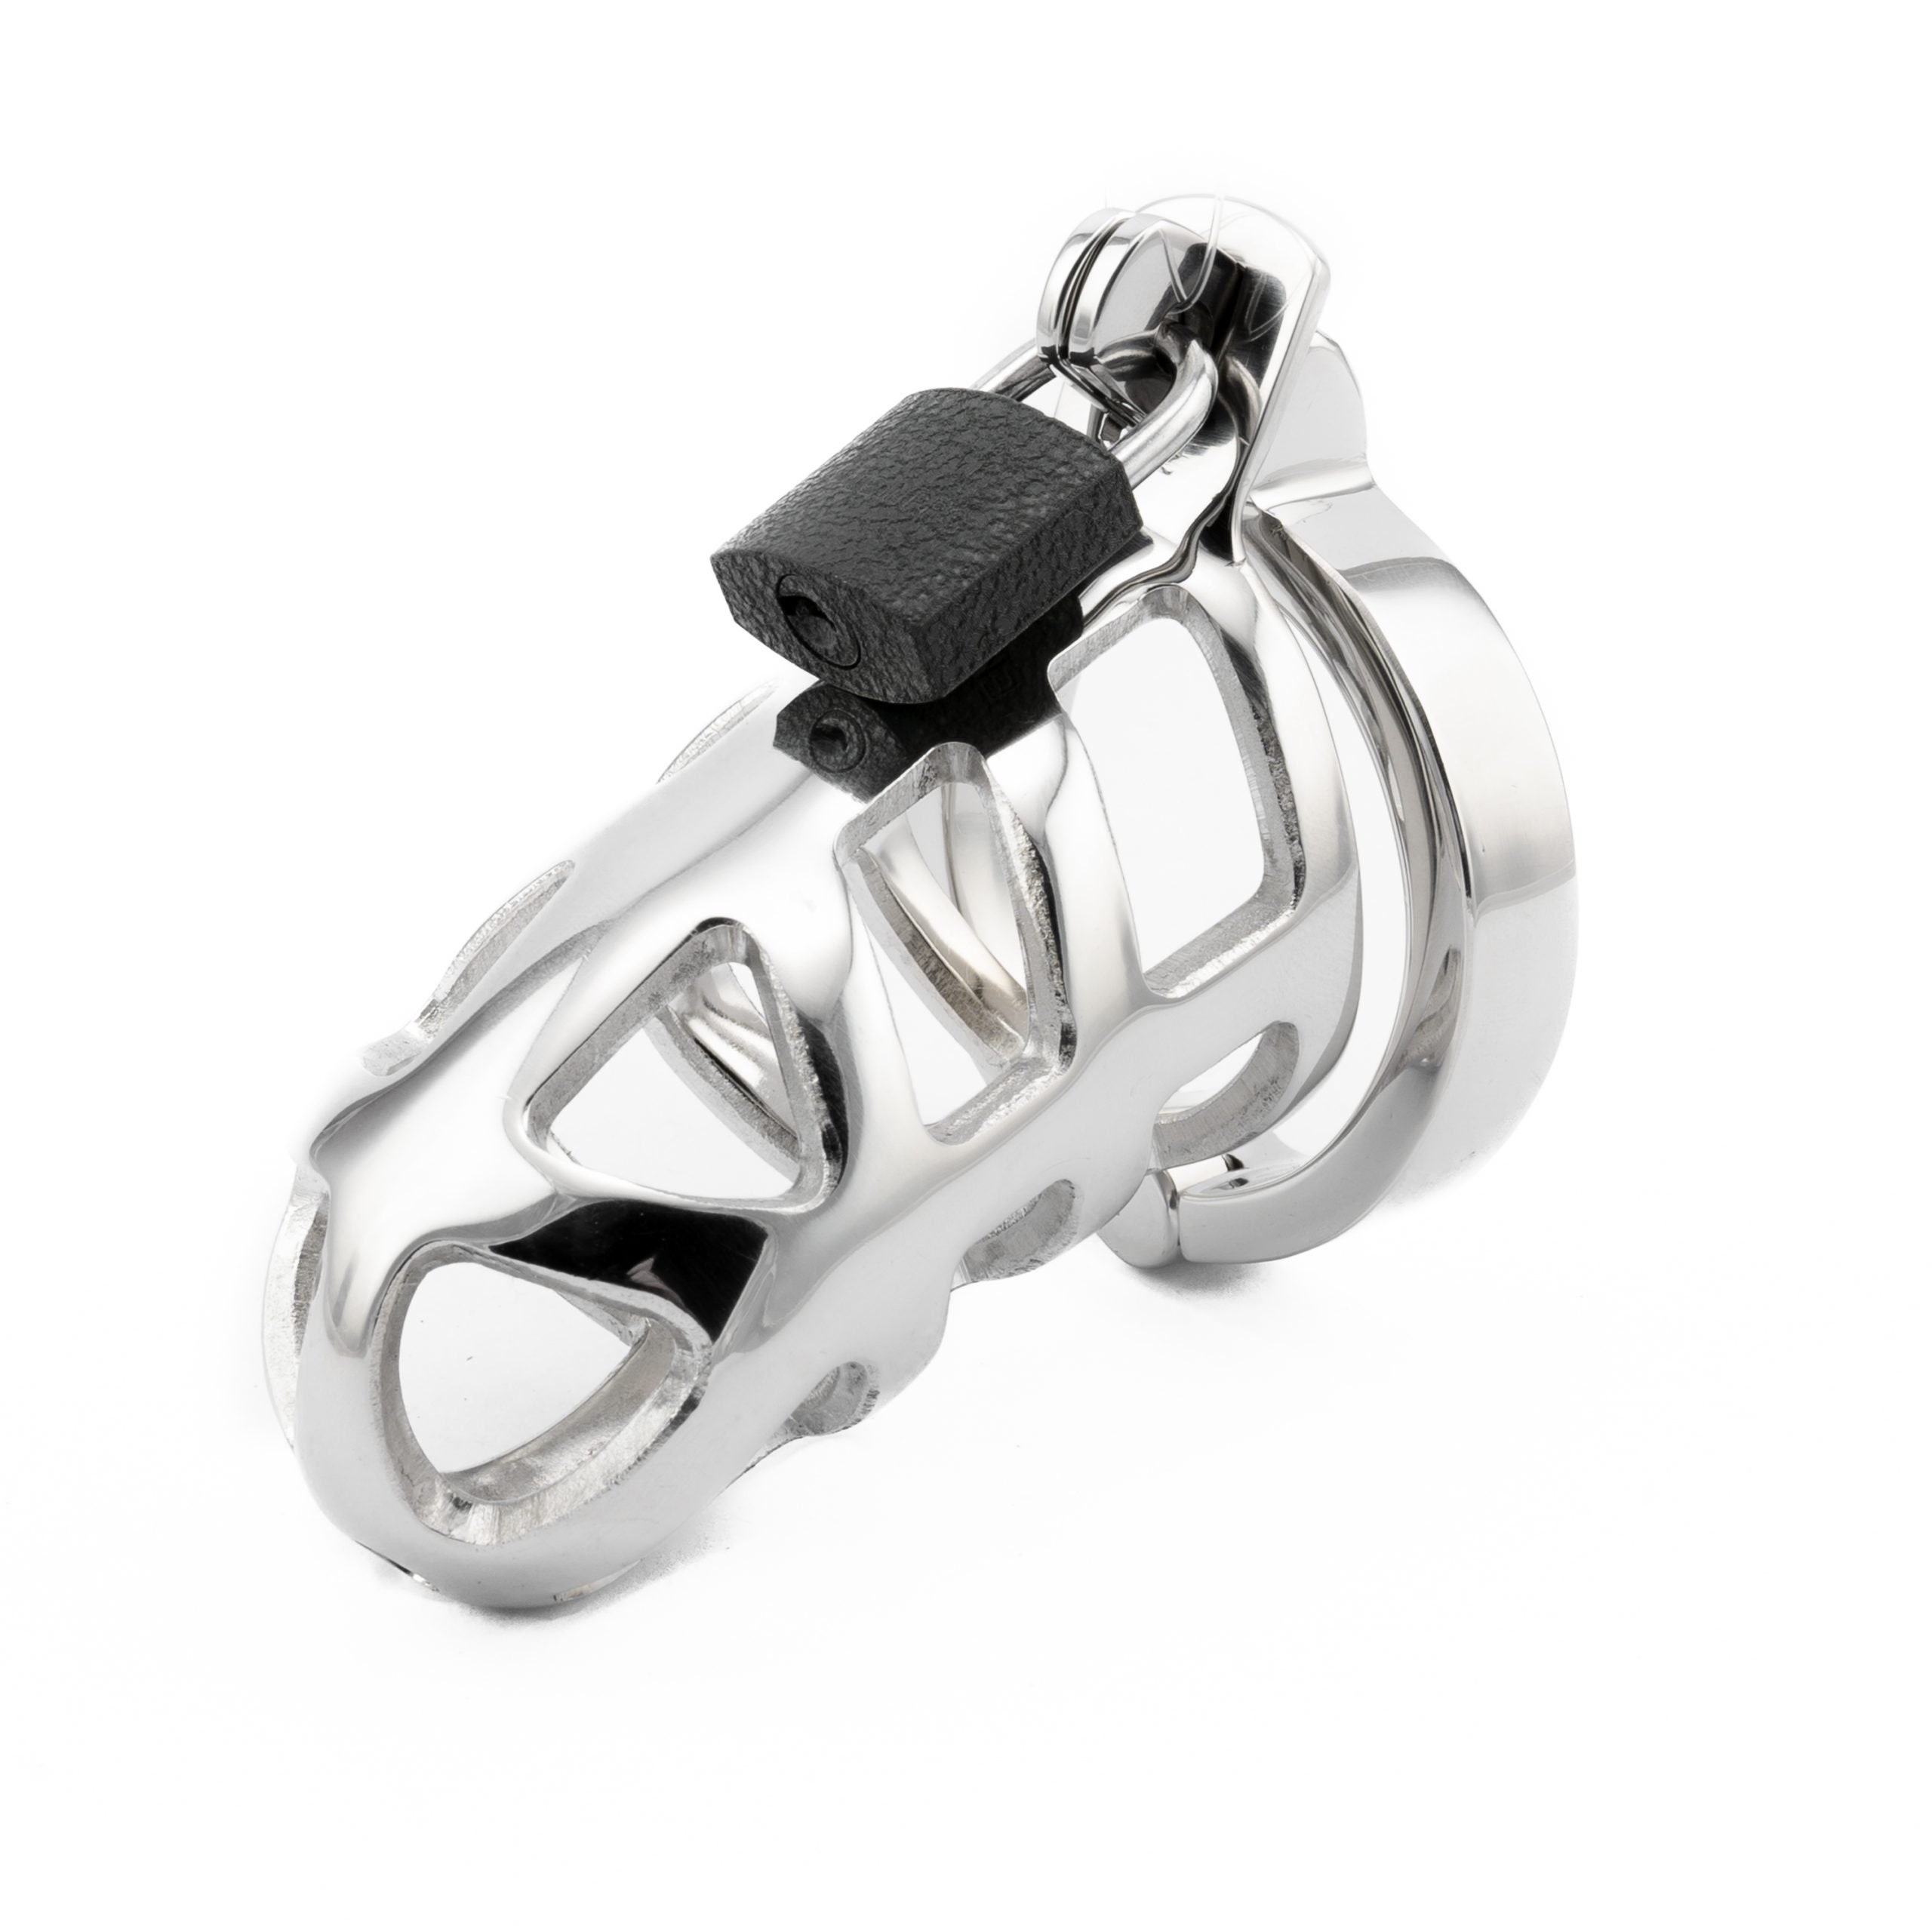 Brutal Chastity Cage Mens Stainless Steel Chastity Device photo pic